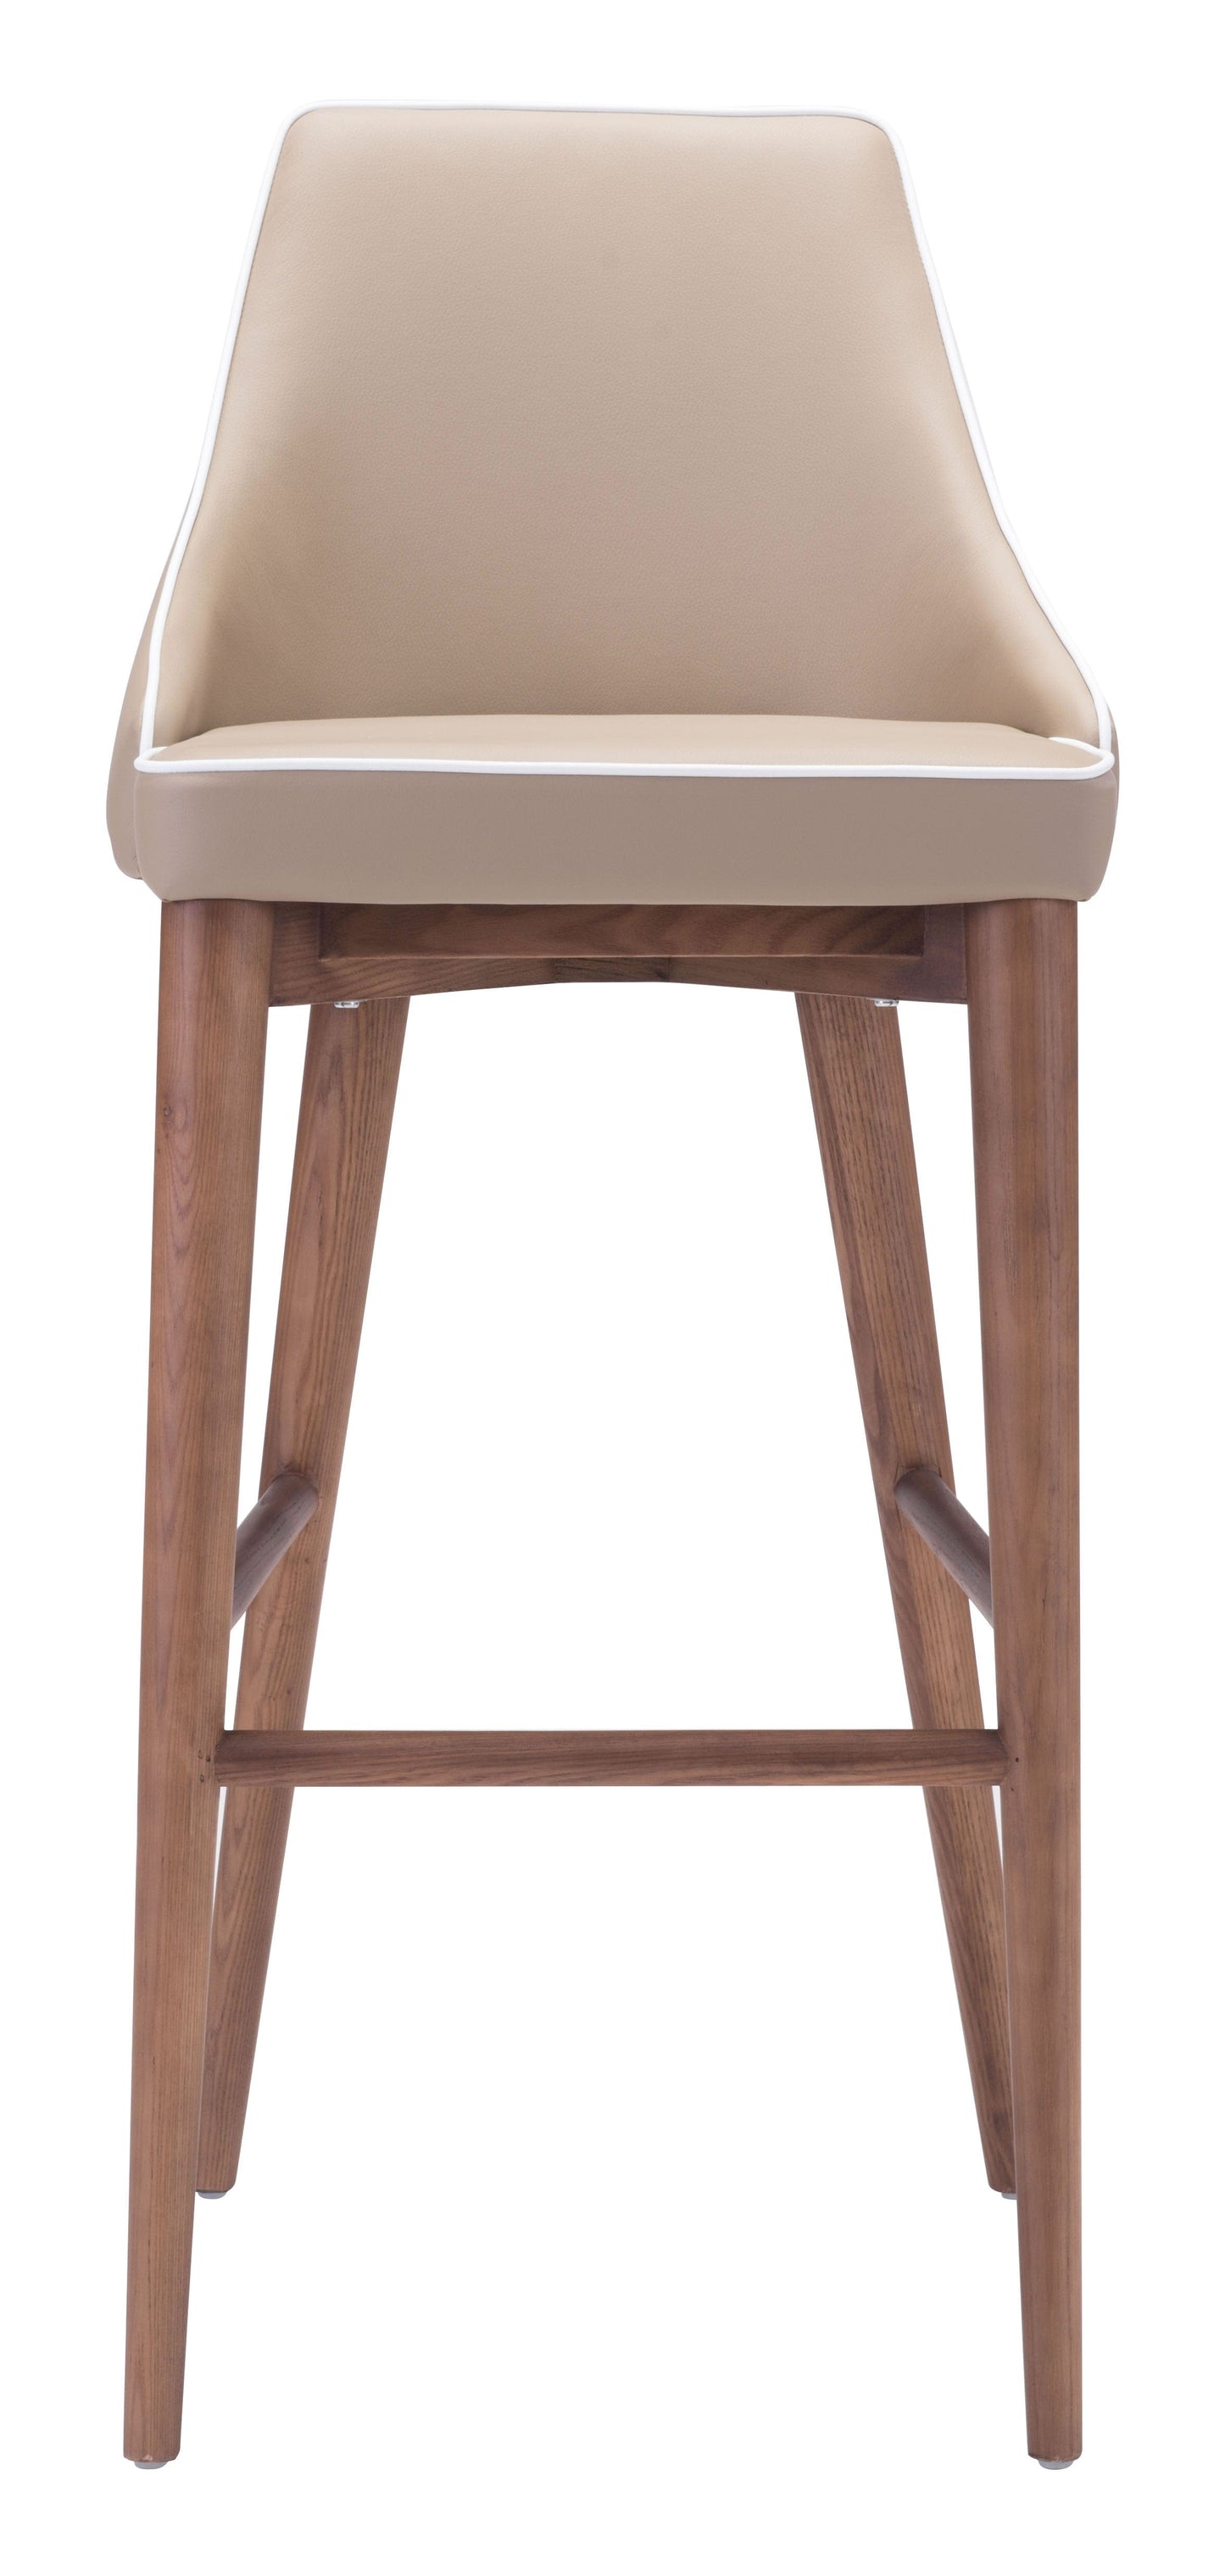 Front View of Beige Bar Chair